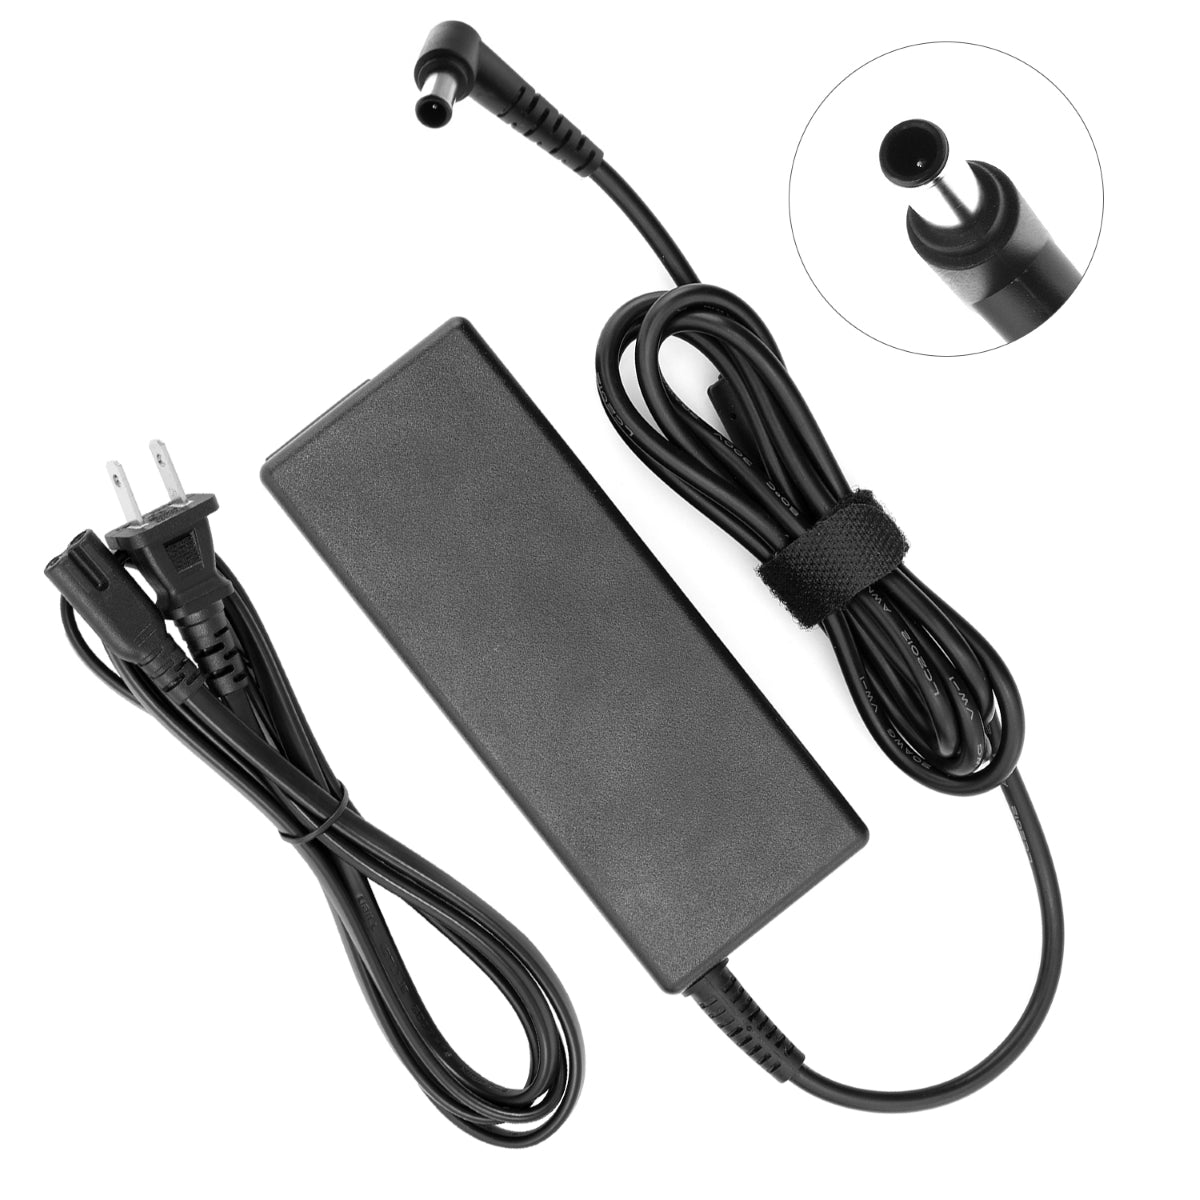 AC Adapter Power Supply for Samsung Syncmaster S24B300HL Monitor